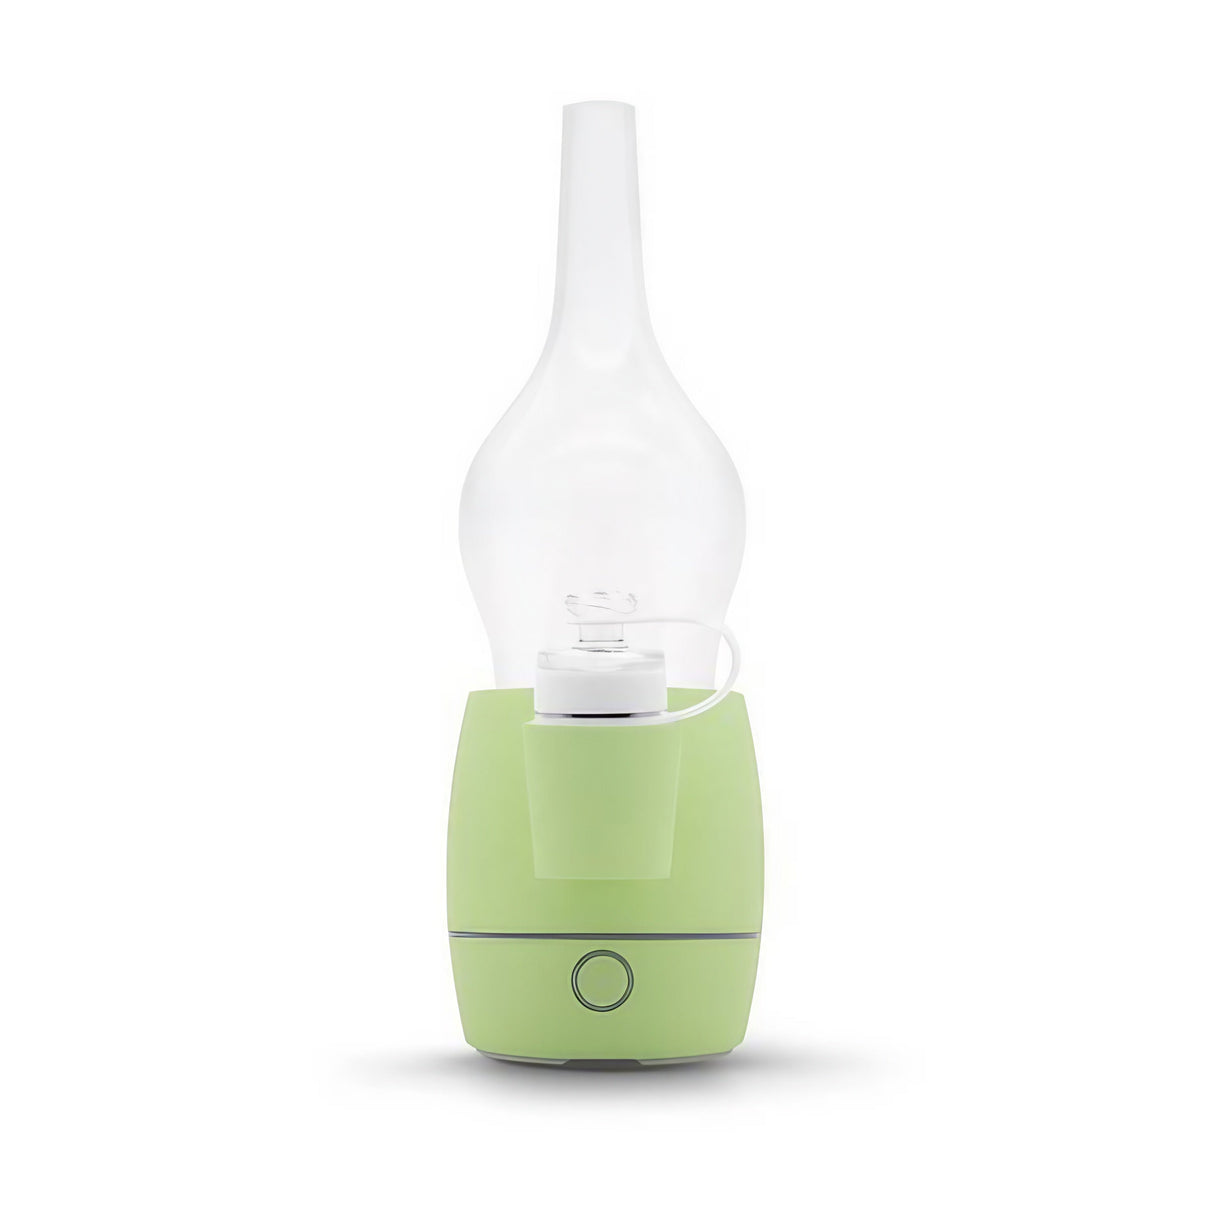 KandyPens Oura Vaporizer in Lime Green with Quartz Atomizer - 3000mAh, Front View